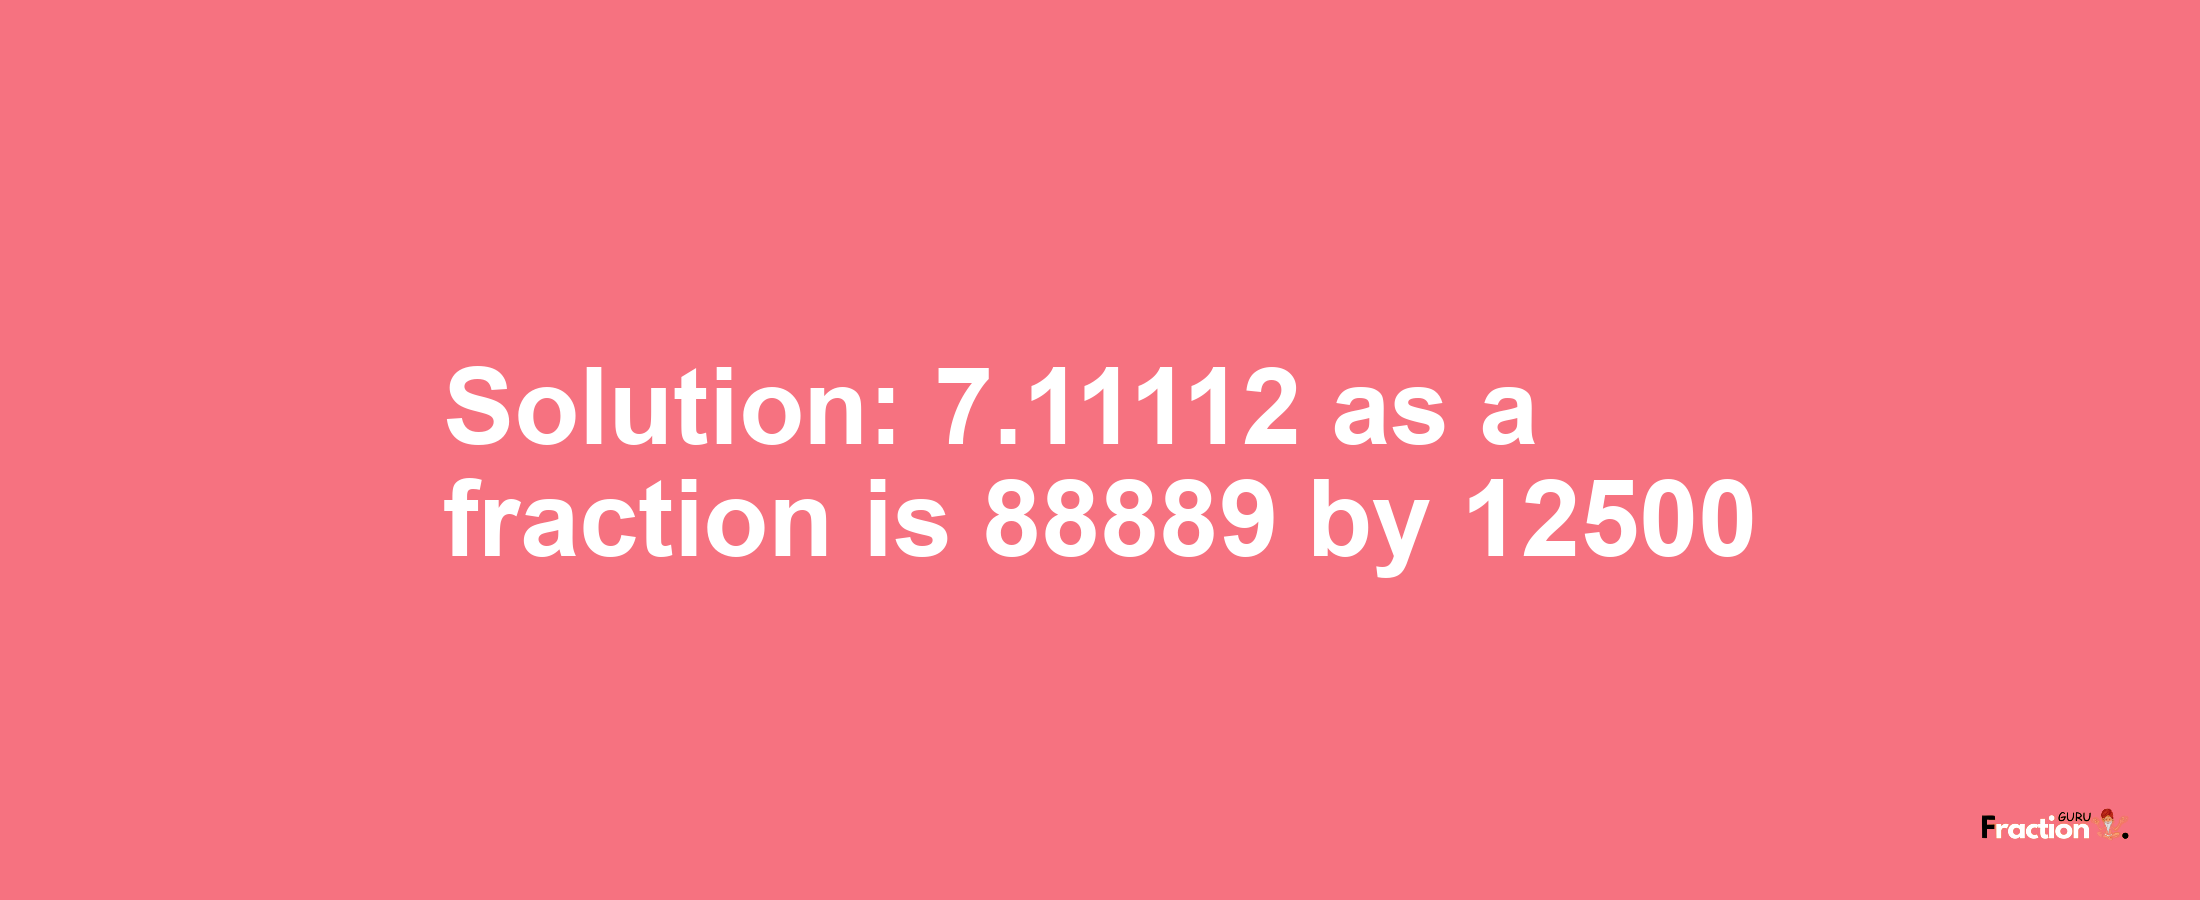 Solution:7.11112 as a fraction is 88889/12500